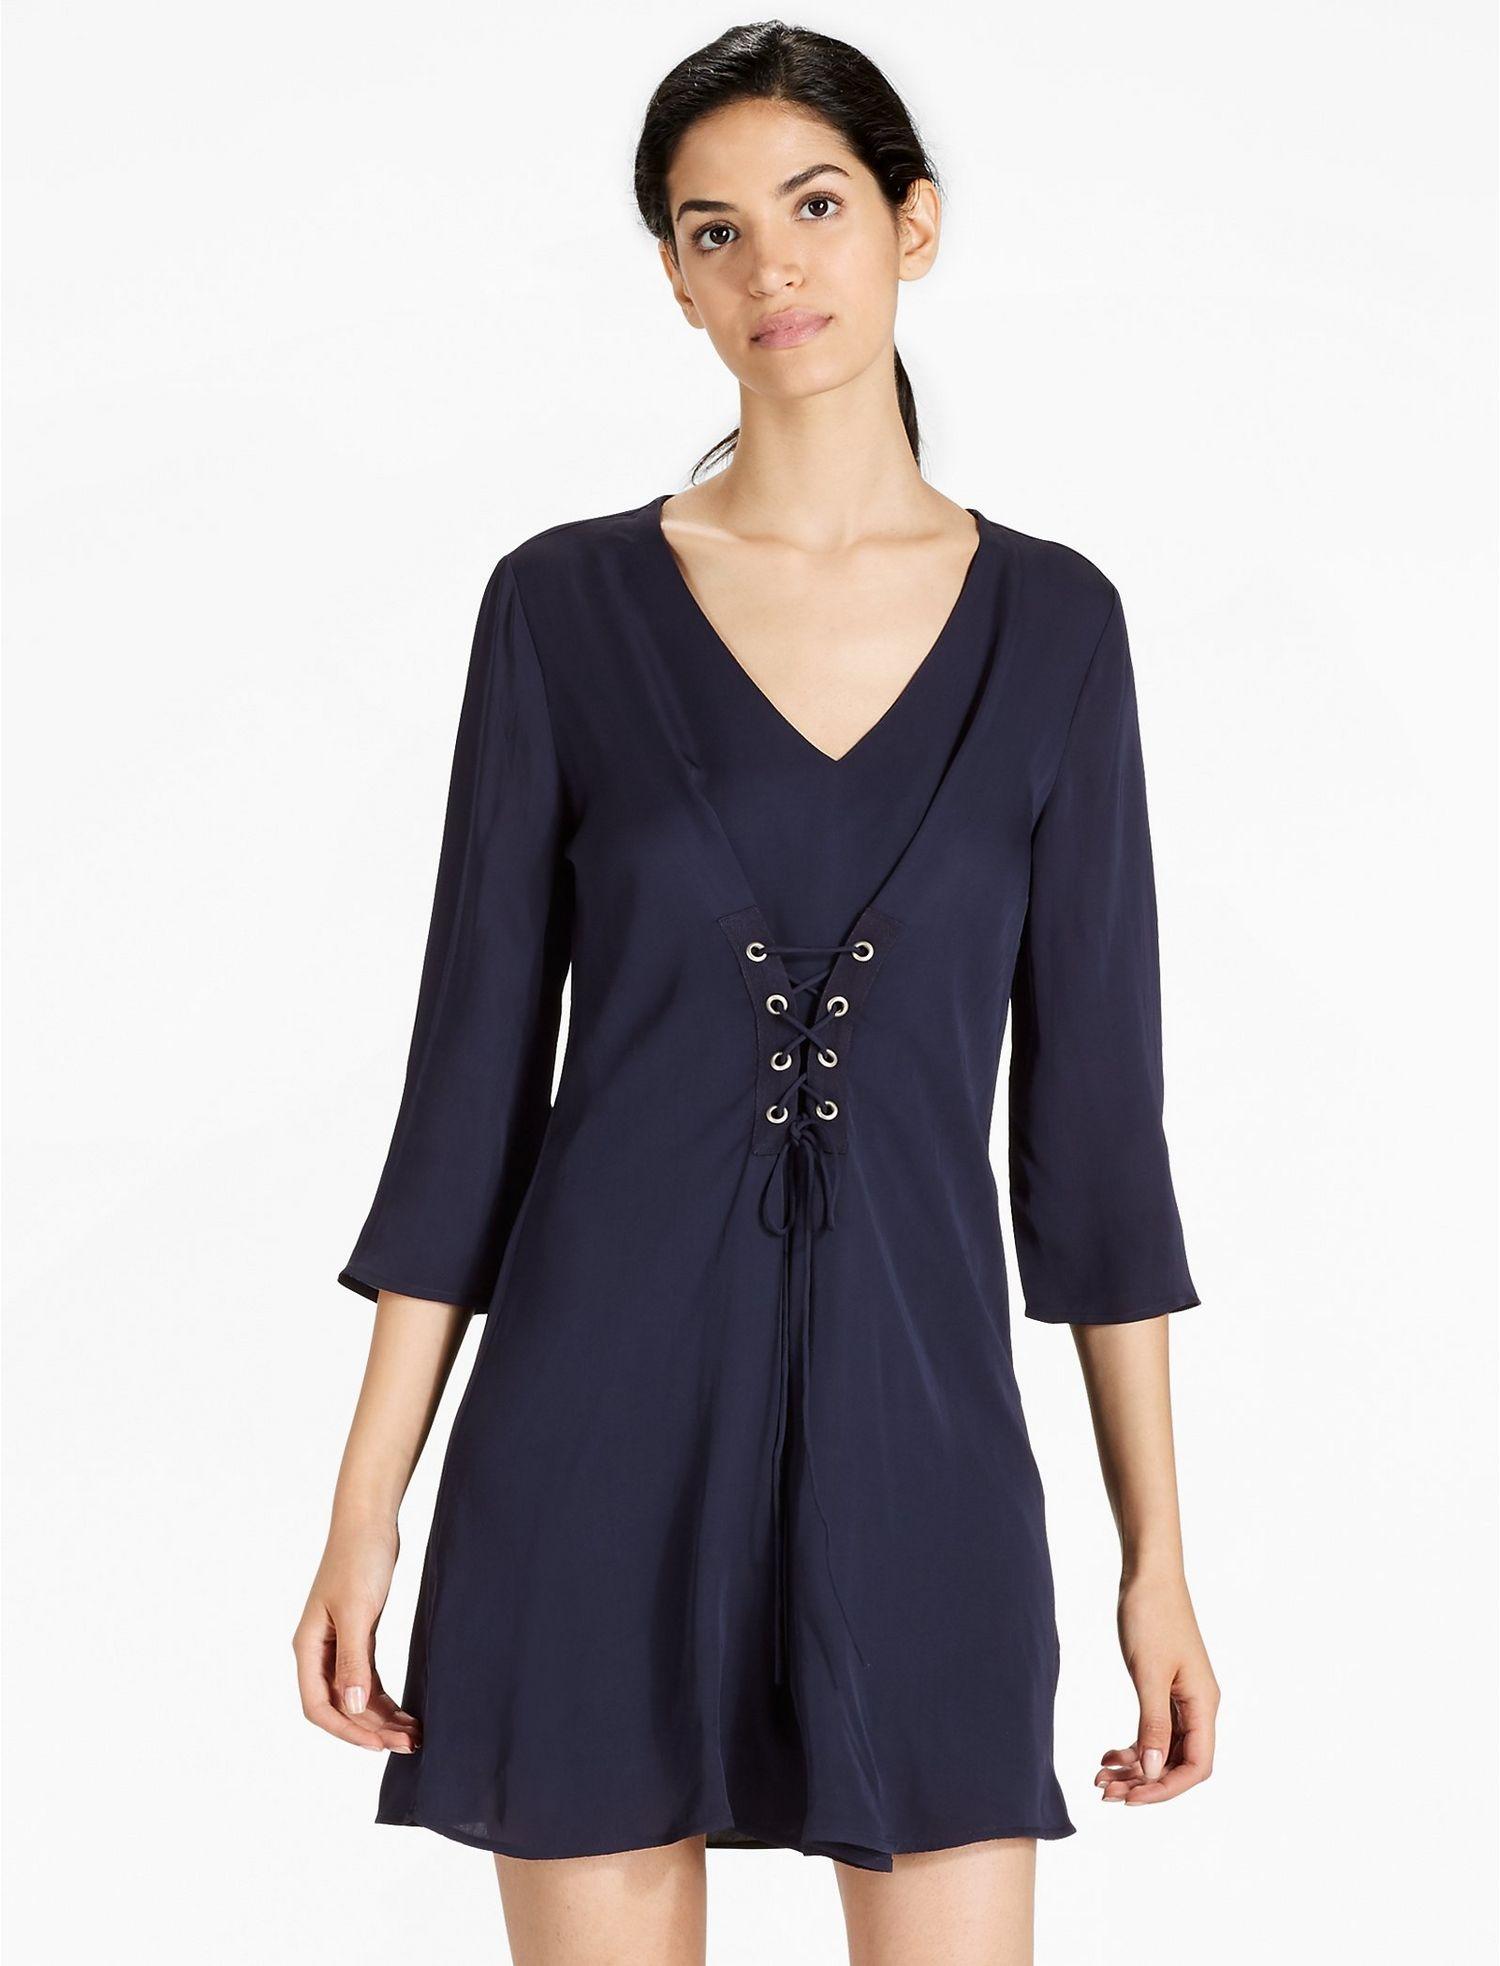 Lucky Brand Synthetic Shirt Dress in Blue - Lyst